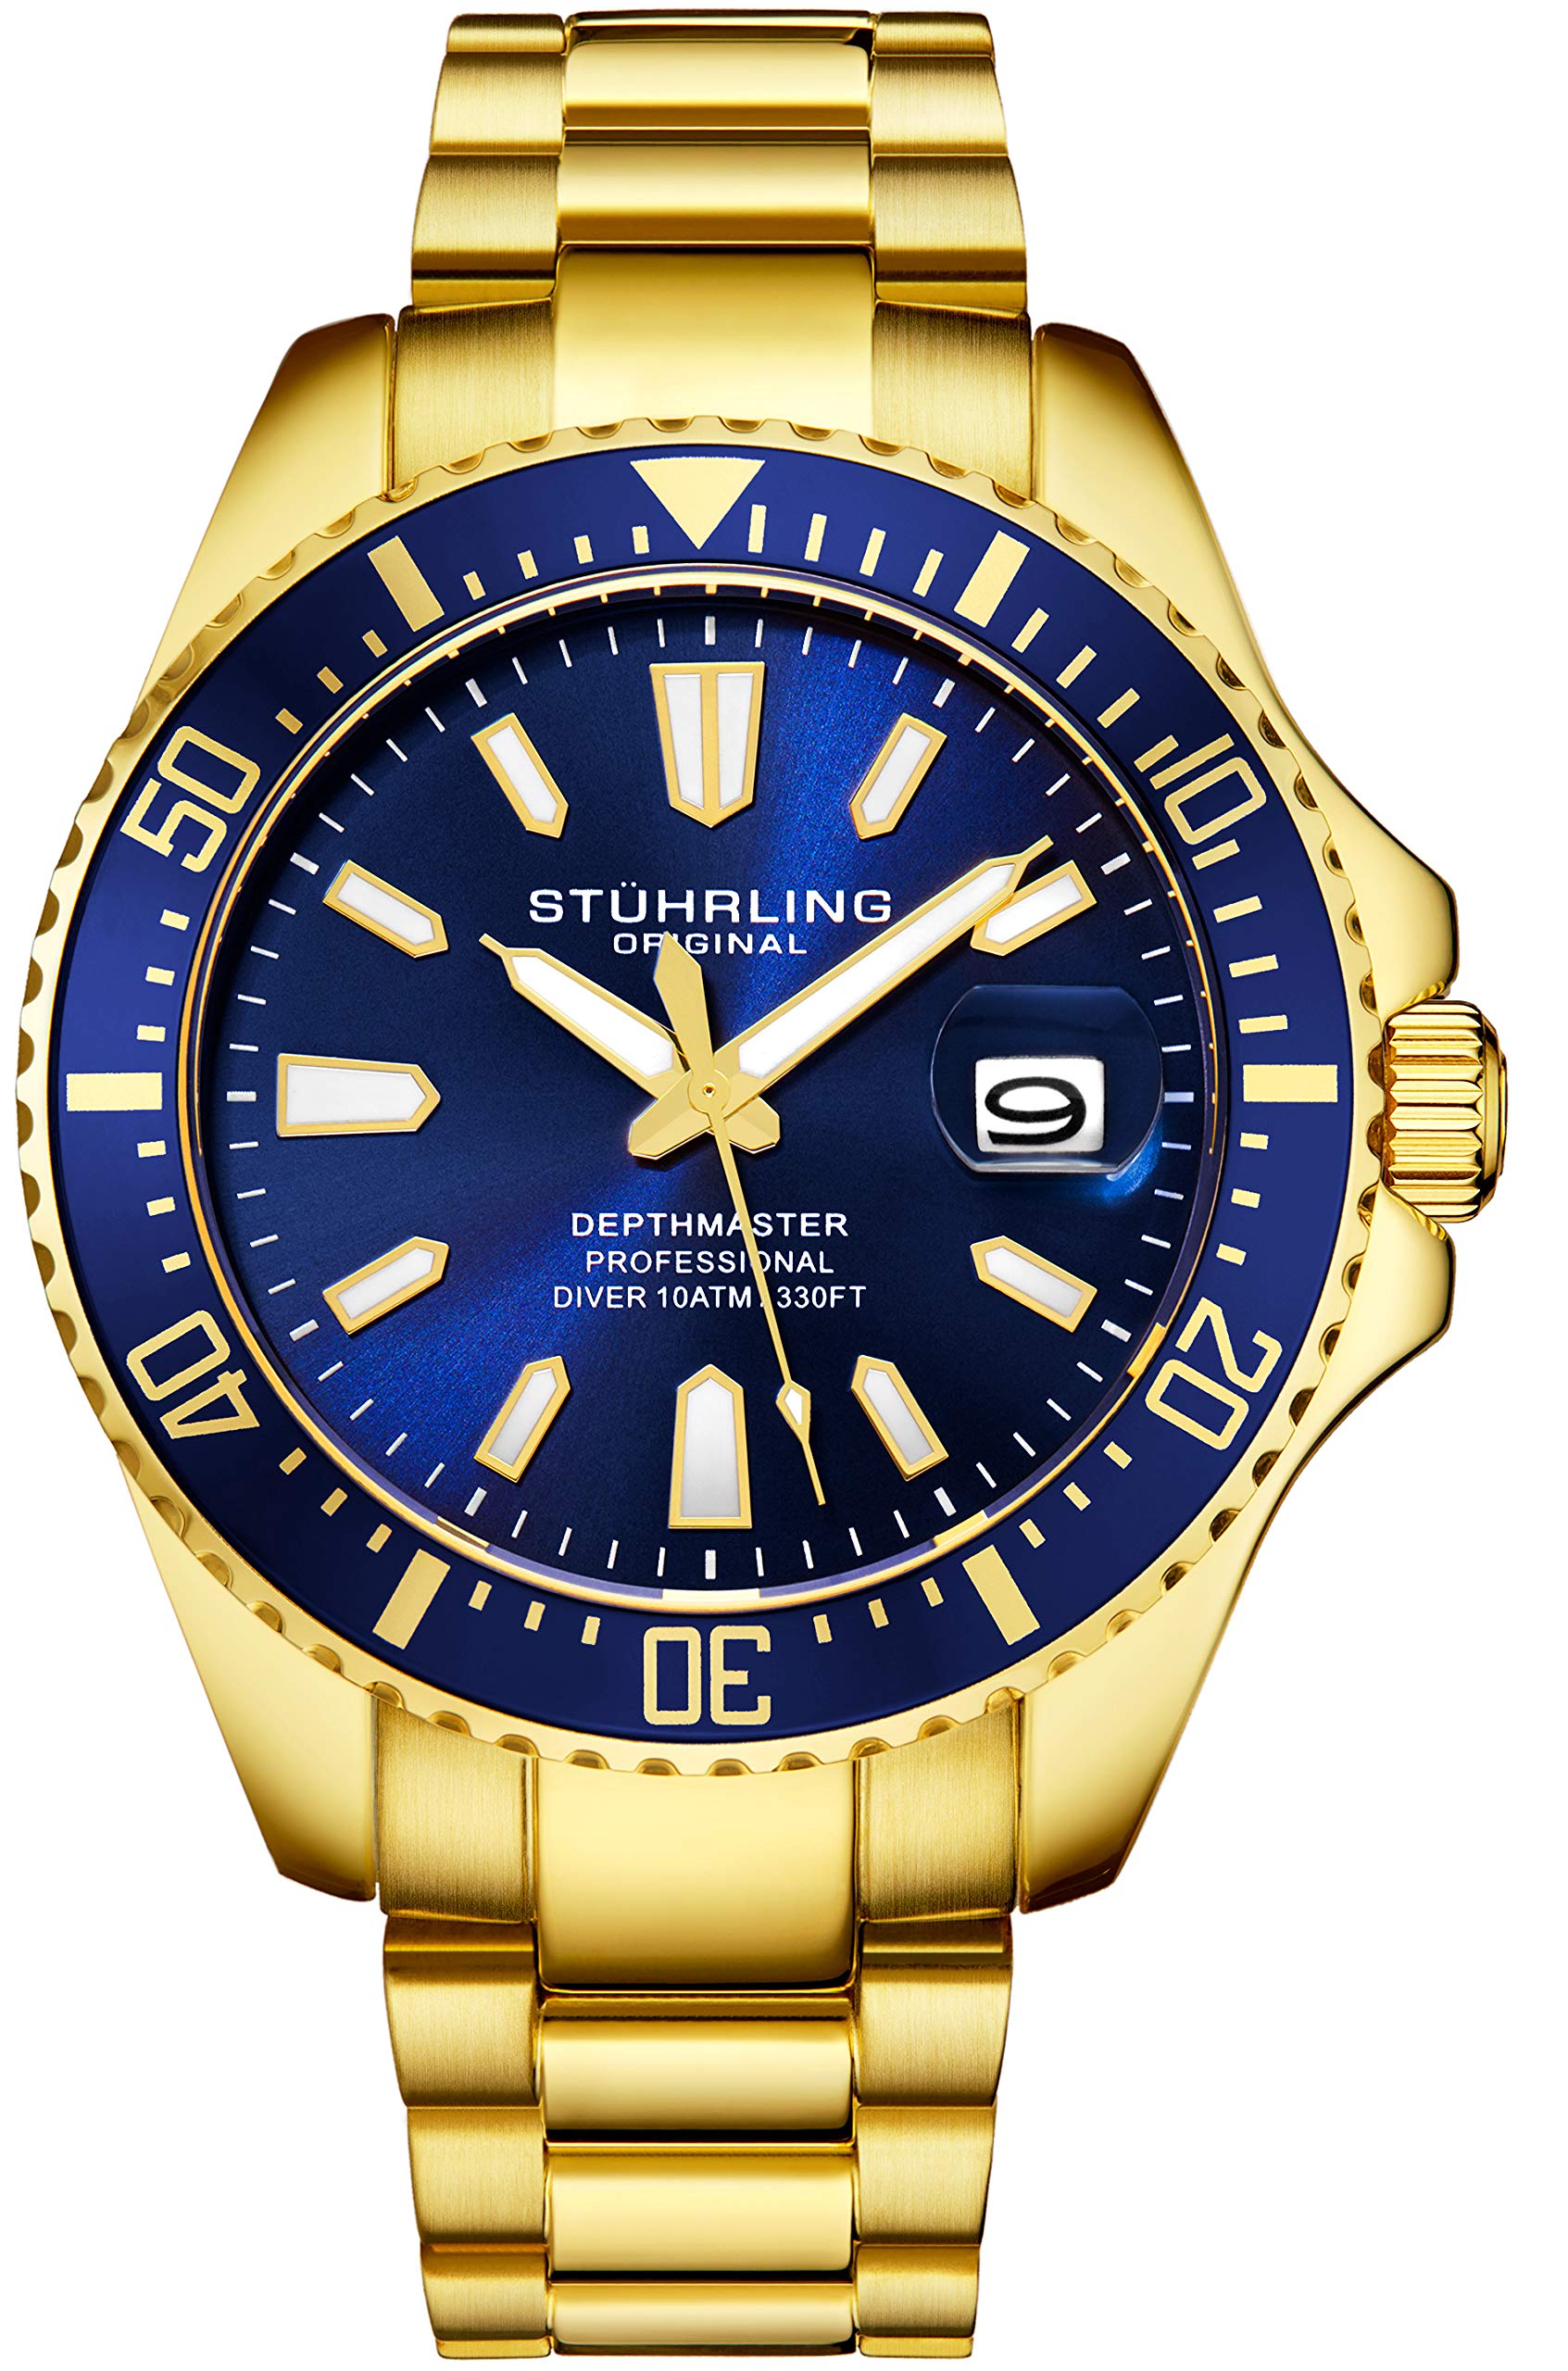 Stuhrling Original Men's Watches Dive Watch Black Dial 42MM Silver Stainless Steel Bracelet Water Resistant to 330 FT